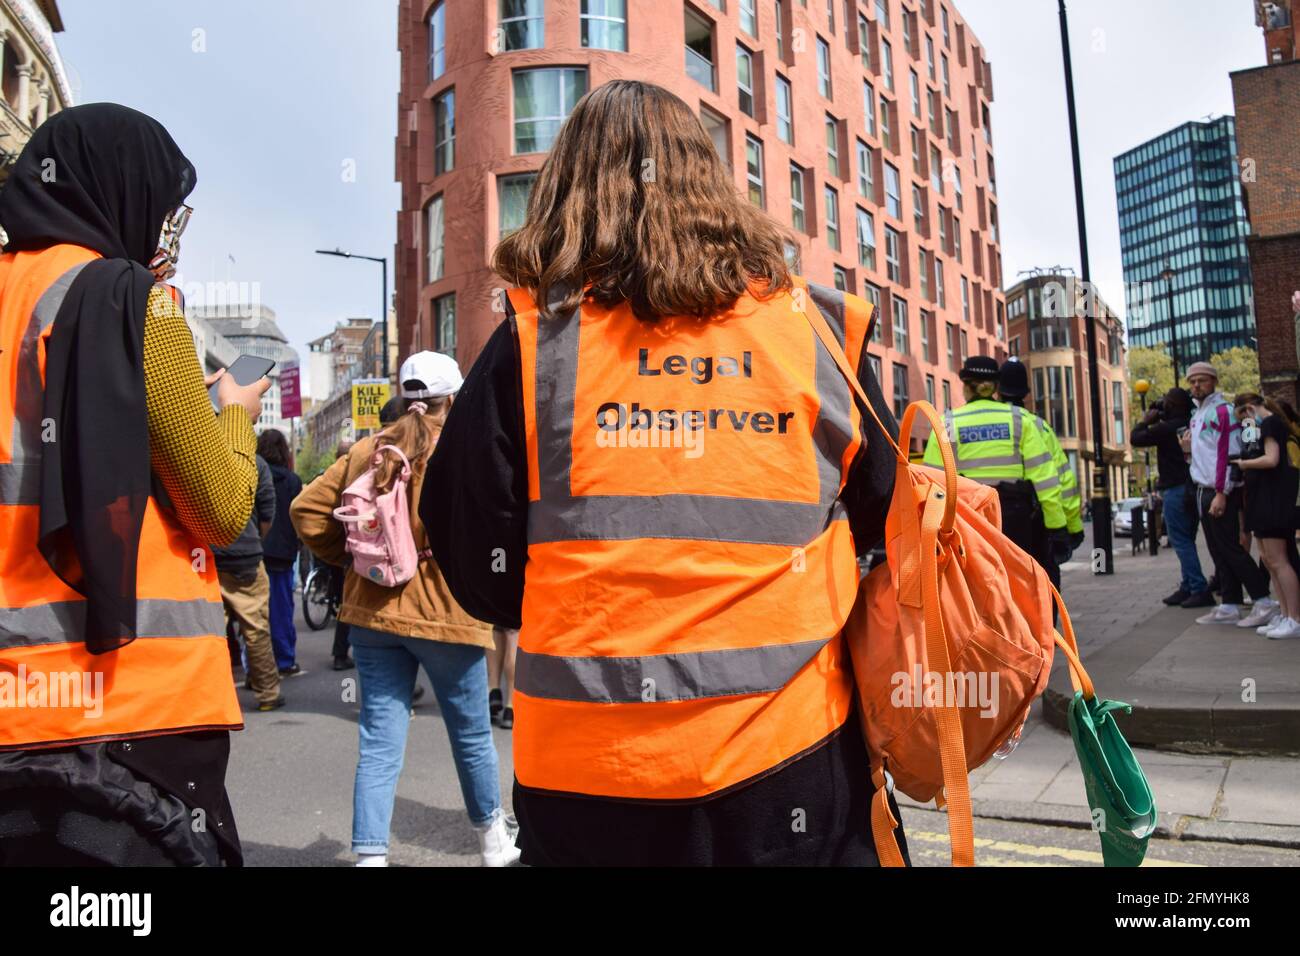 London, United Kingdom. 1st May 2021. Legal Observers at the Kill The Bill protest. Thousands of people marched through Central London in protest against the Police, Crime, Sentencing and Courts Bill. Stock Photo